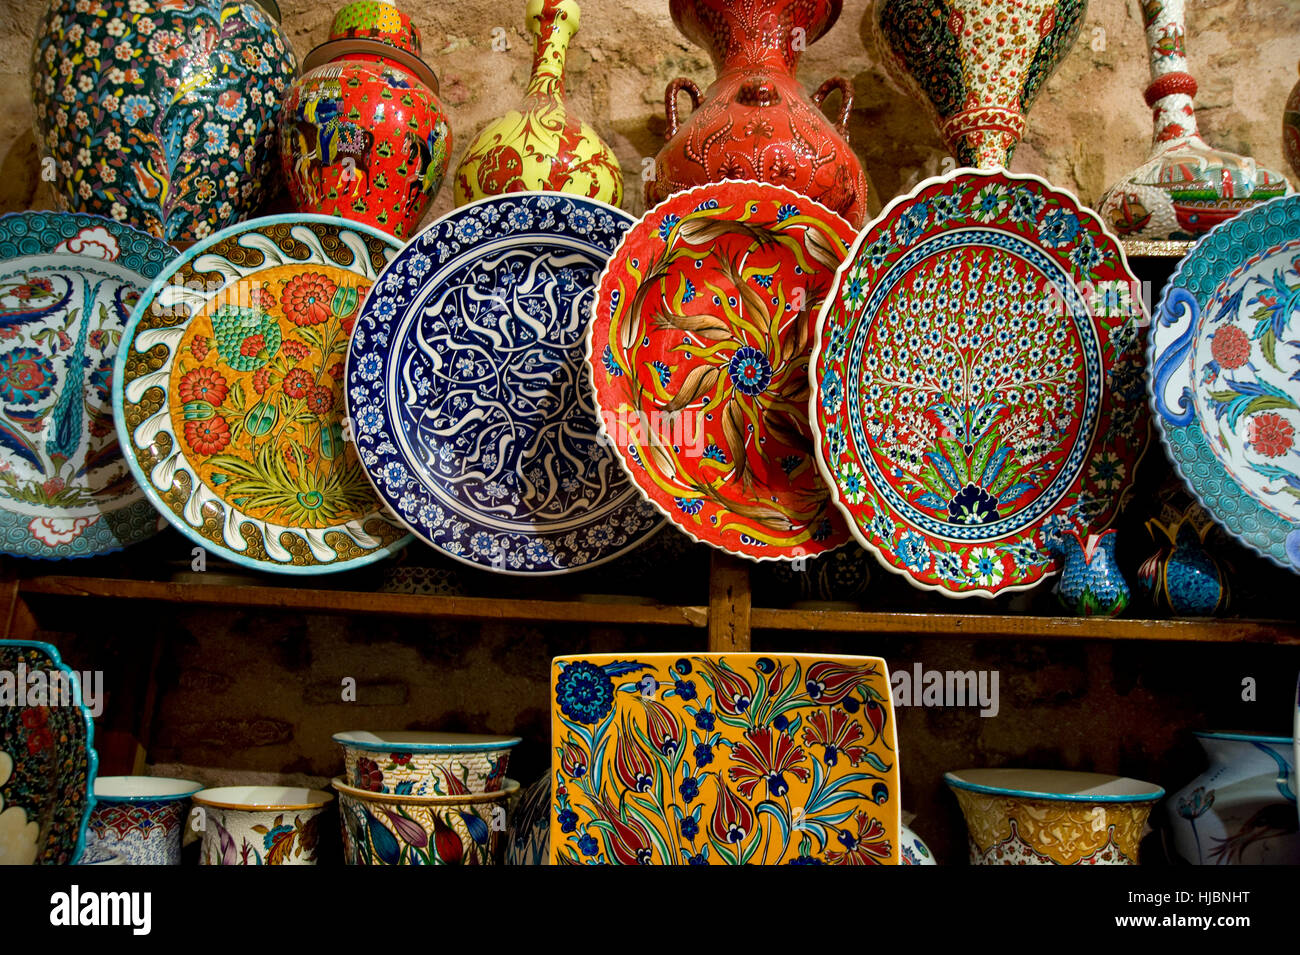 Ceramic artifacts on display for sale in the Covered Bazaar in Istanbul, Turkey Stock Photo